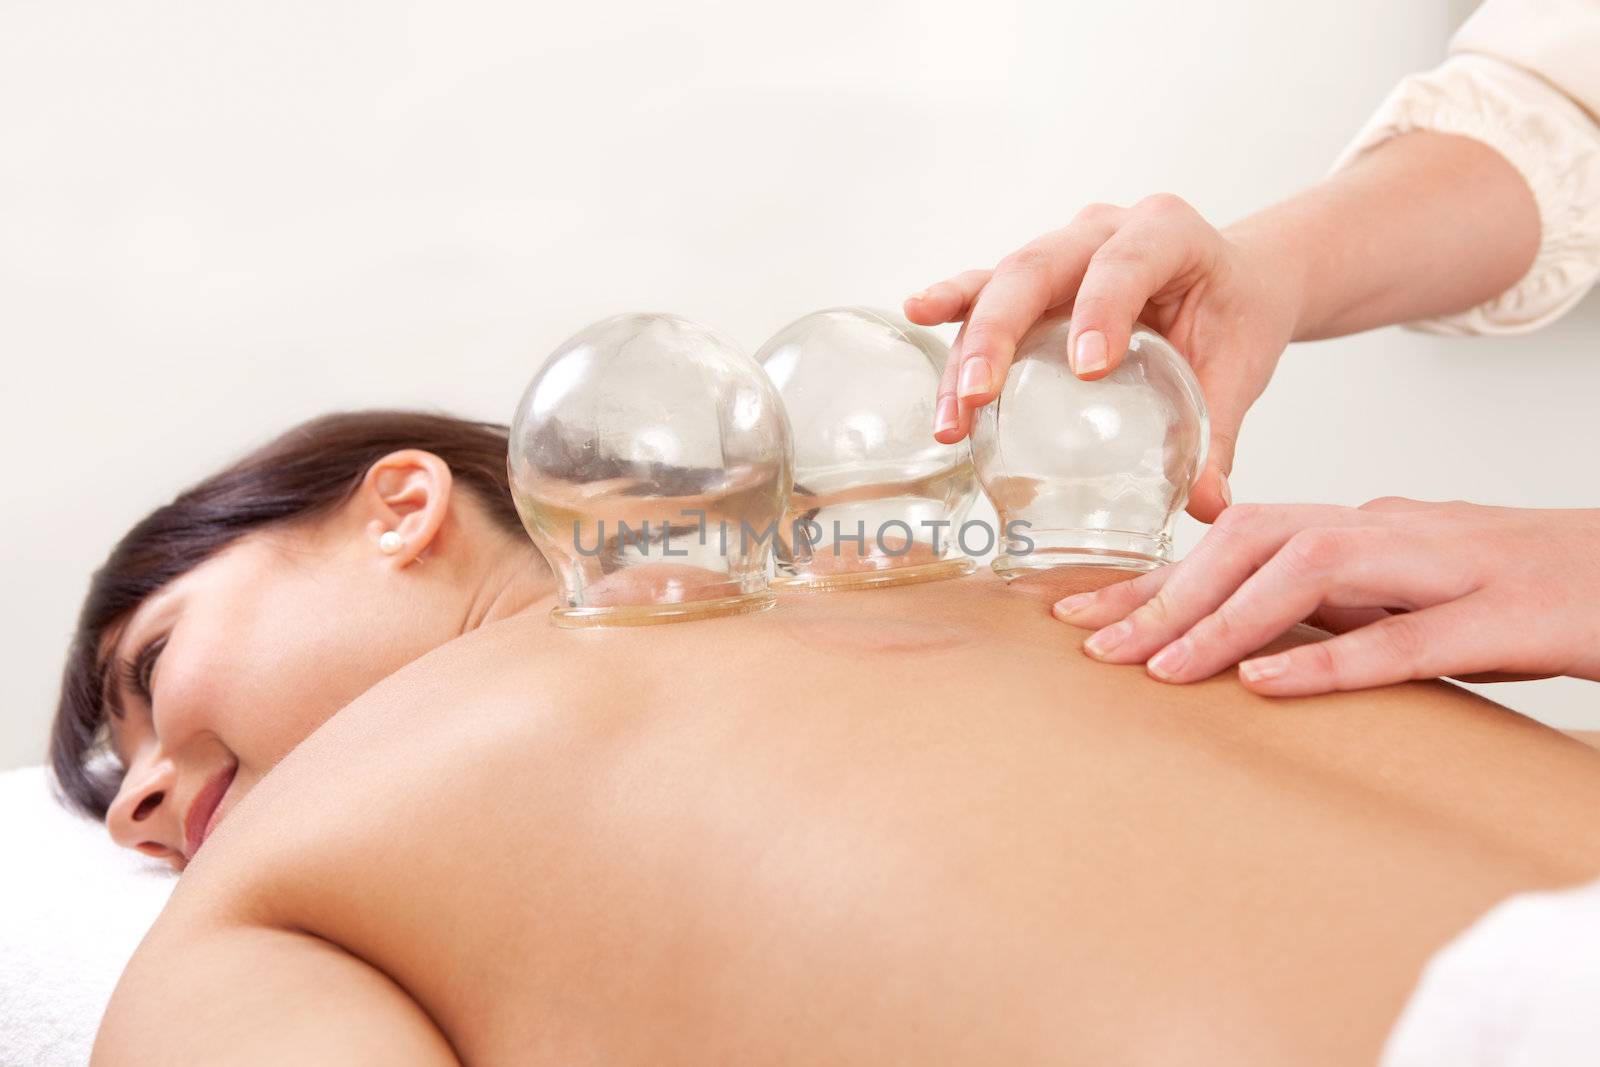 Acupuncture therapist removing a fire cupping glass from the back of a young woman